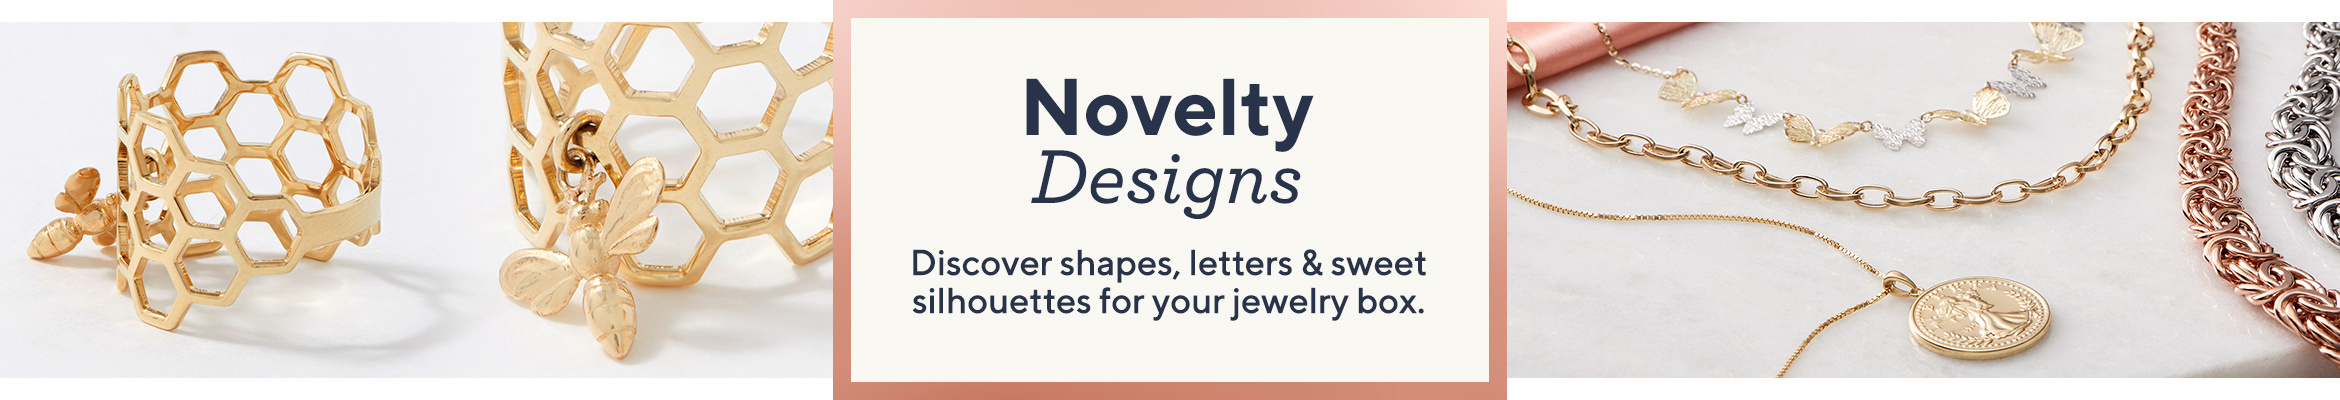 Novelty Designs  Discover shapes, letters & sweet silhouettes for your jewelry box.